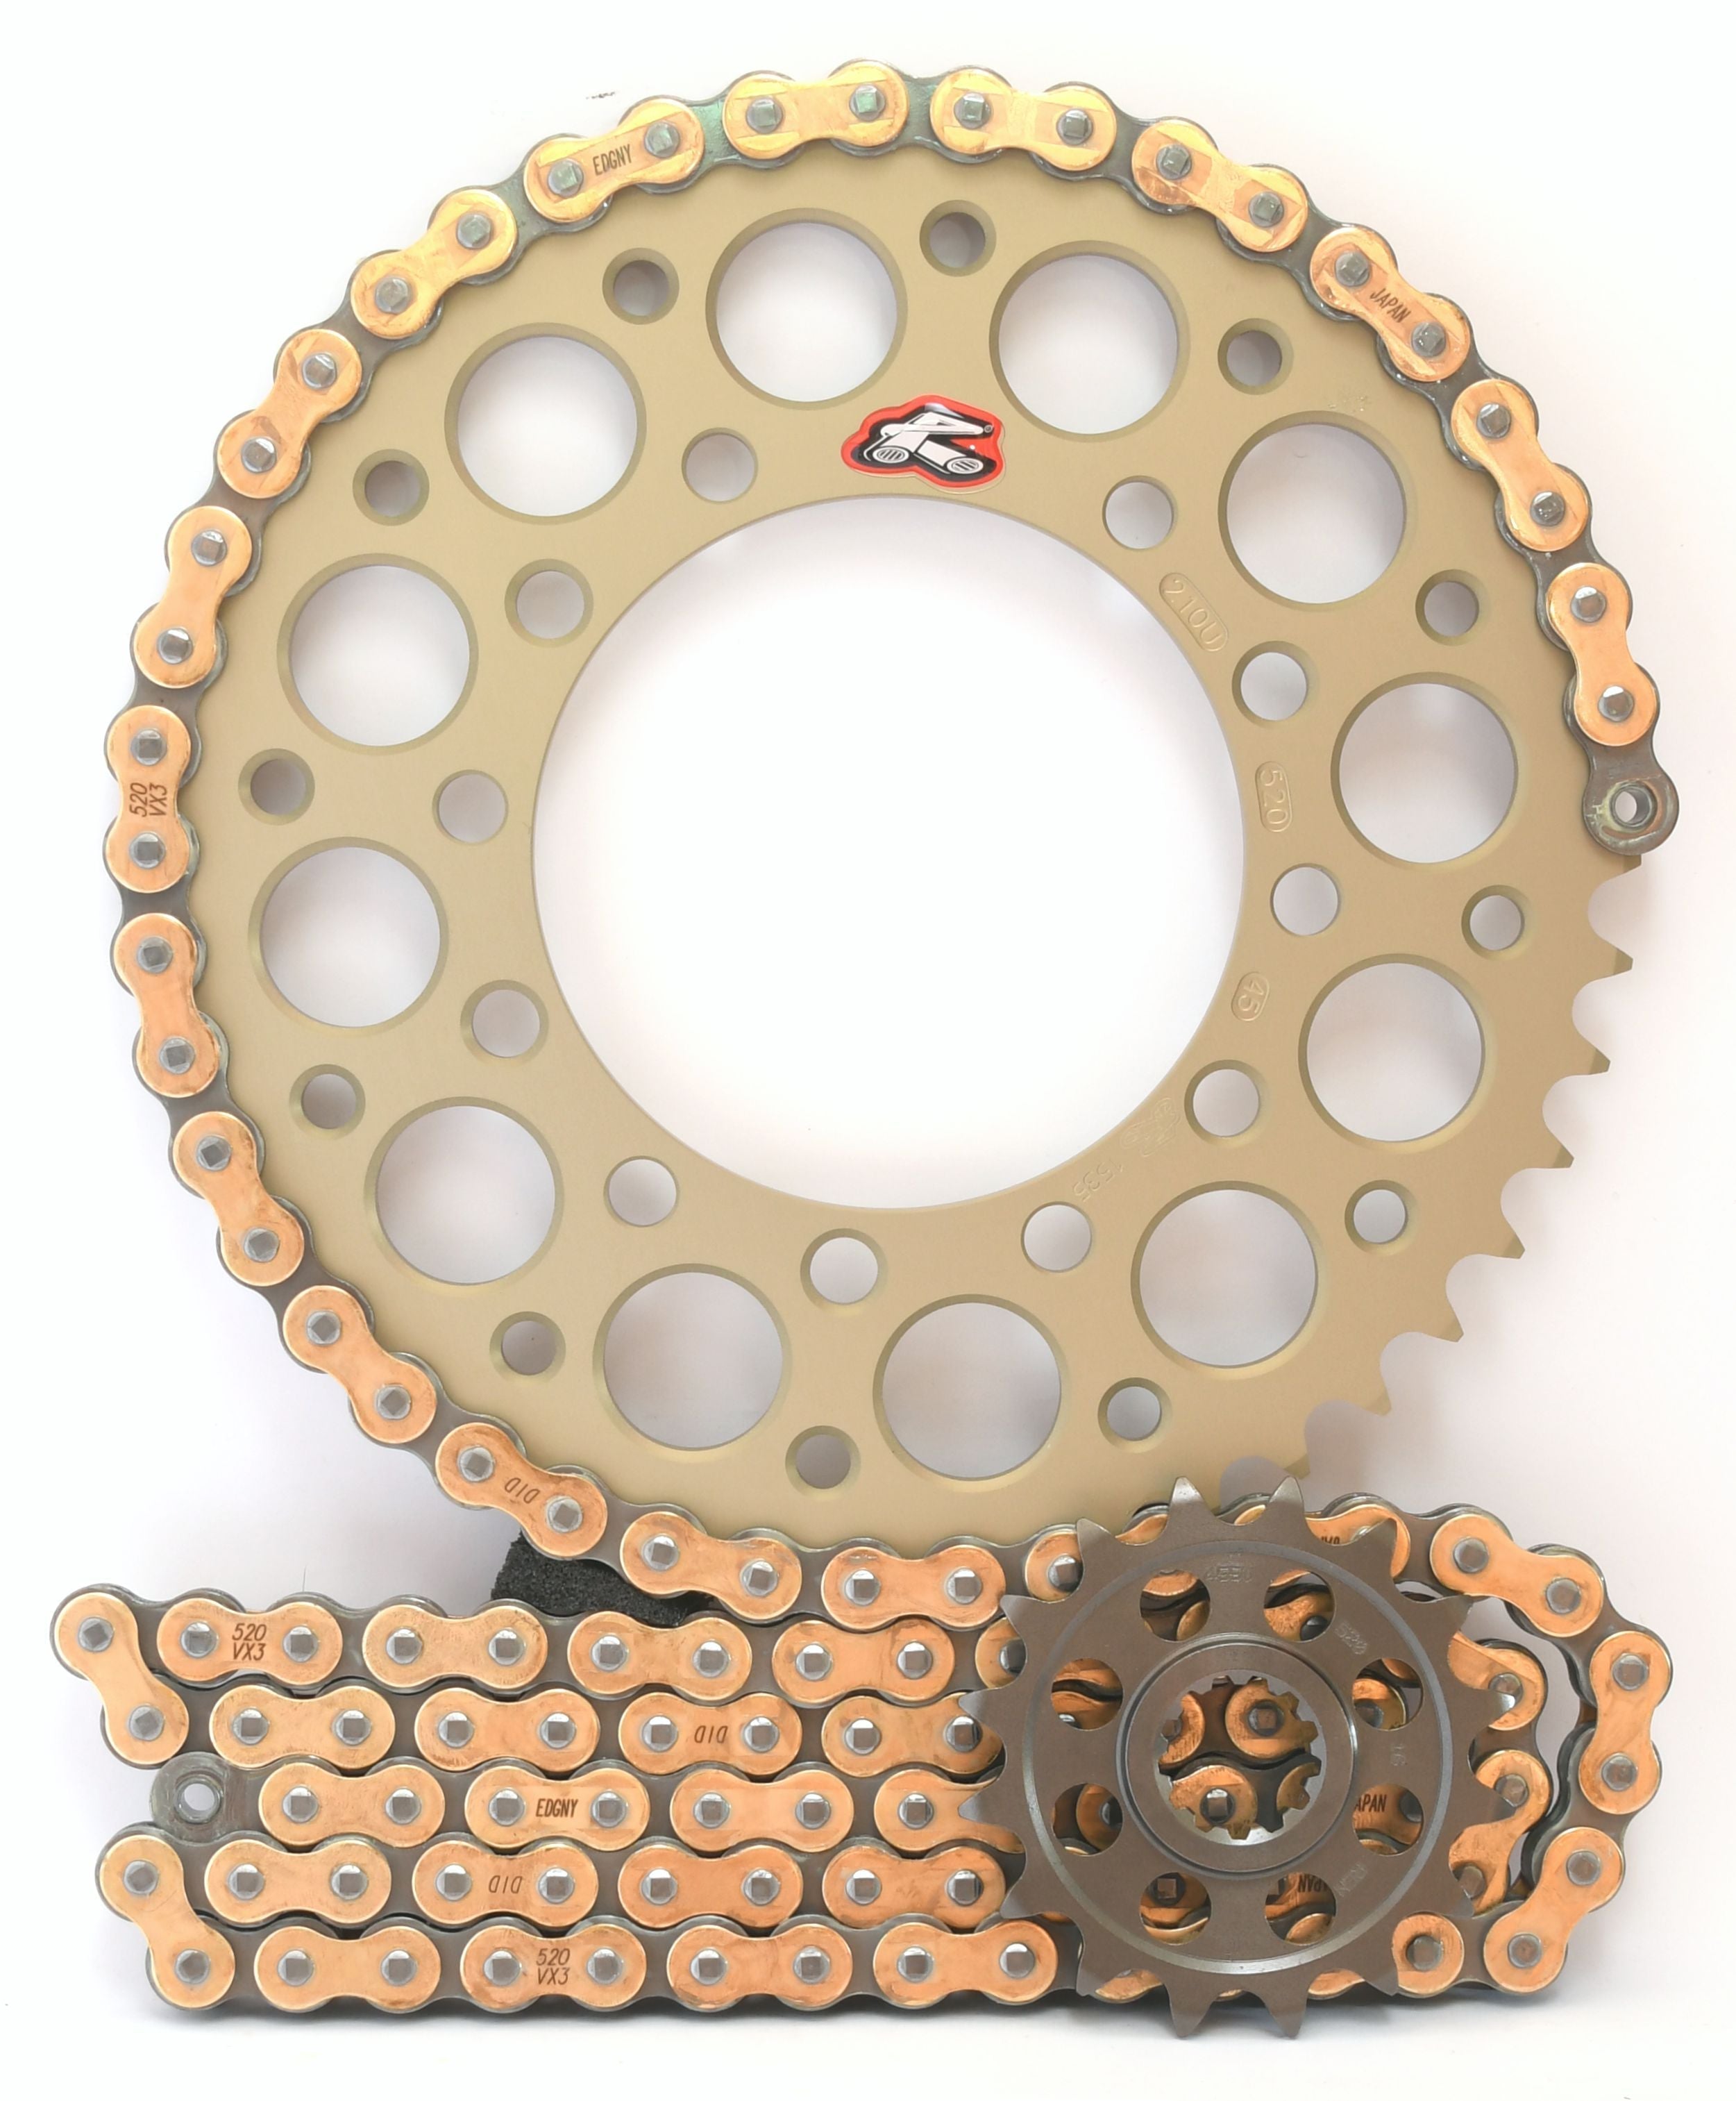 Renthal Ultralight DID Chain & Sprocket Kit 520 Conversion for Suzuki GSX-R600 2011-2018 - Choose Your Gearing